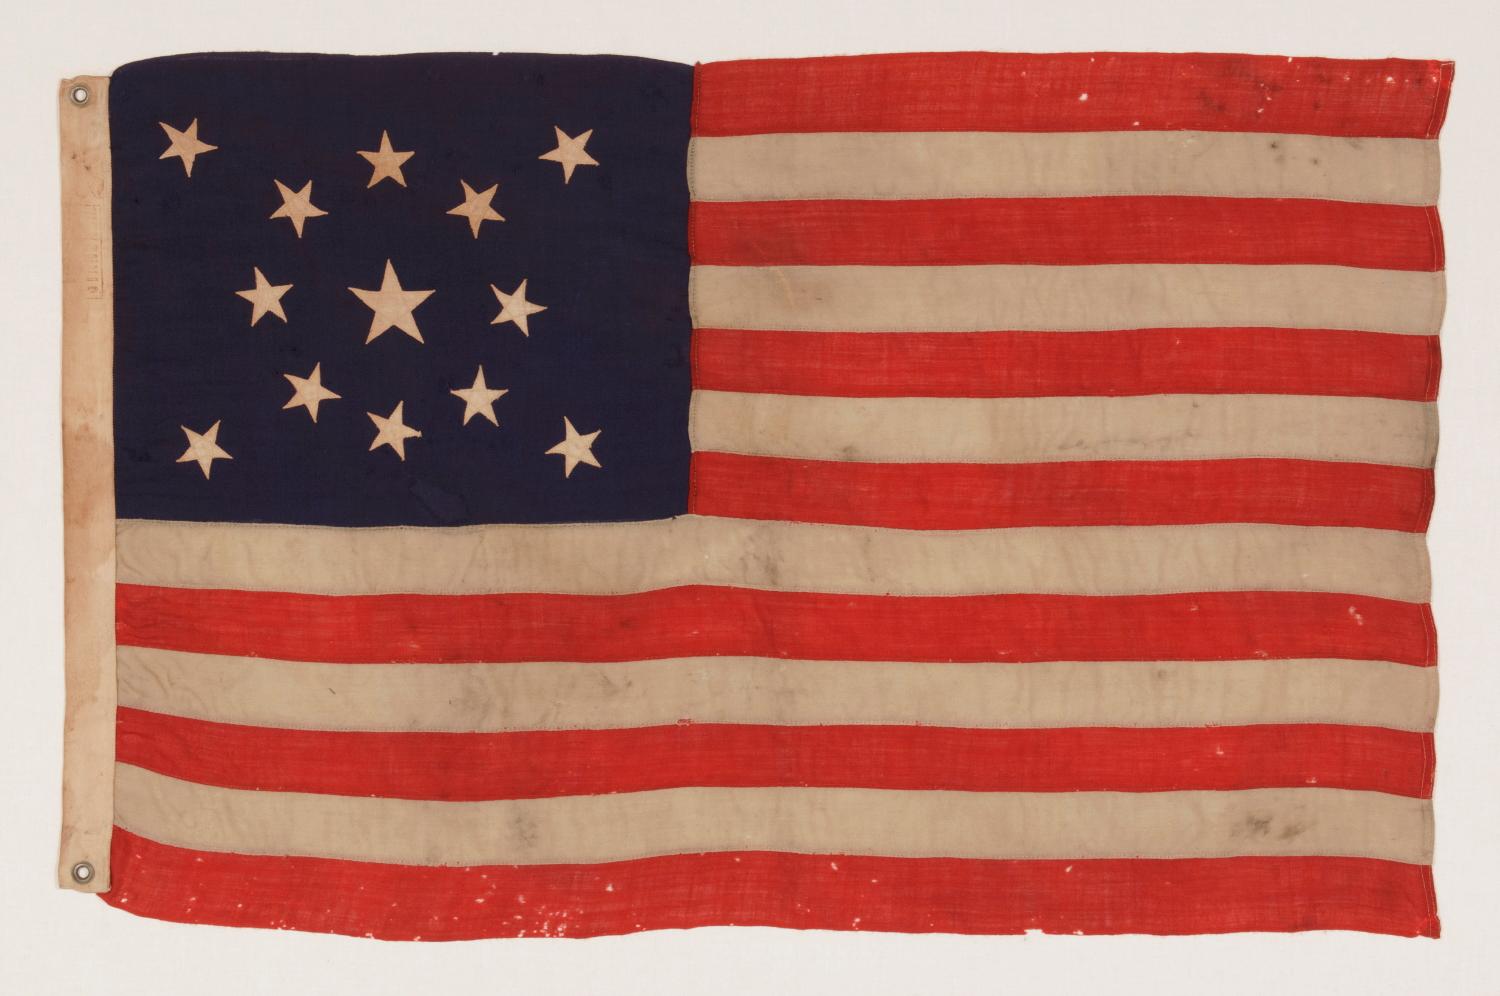 13 STARS IN A MEDALLION CONFIGURATION ON A SMALL-SCALE ANTIQUE AMERICAN FLAG OF THE 1895-1926 ERA:

13 star flag of the type made from roughly the last decade of the 19th century through the first quarter of the 20th. The stars are arranged in a